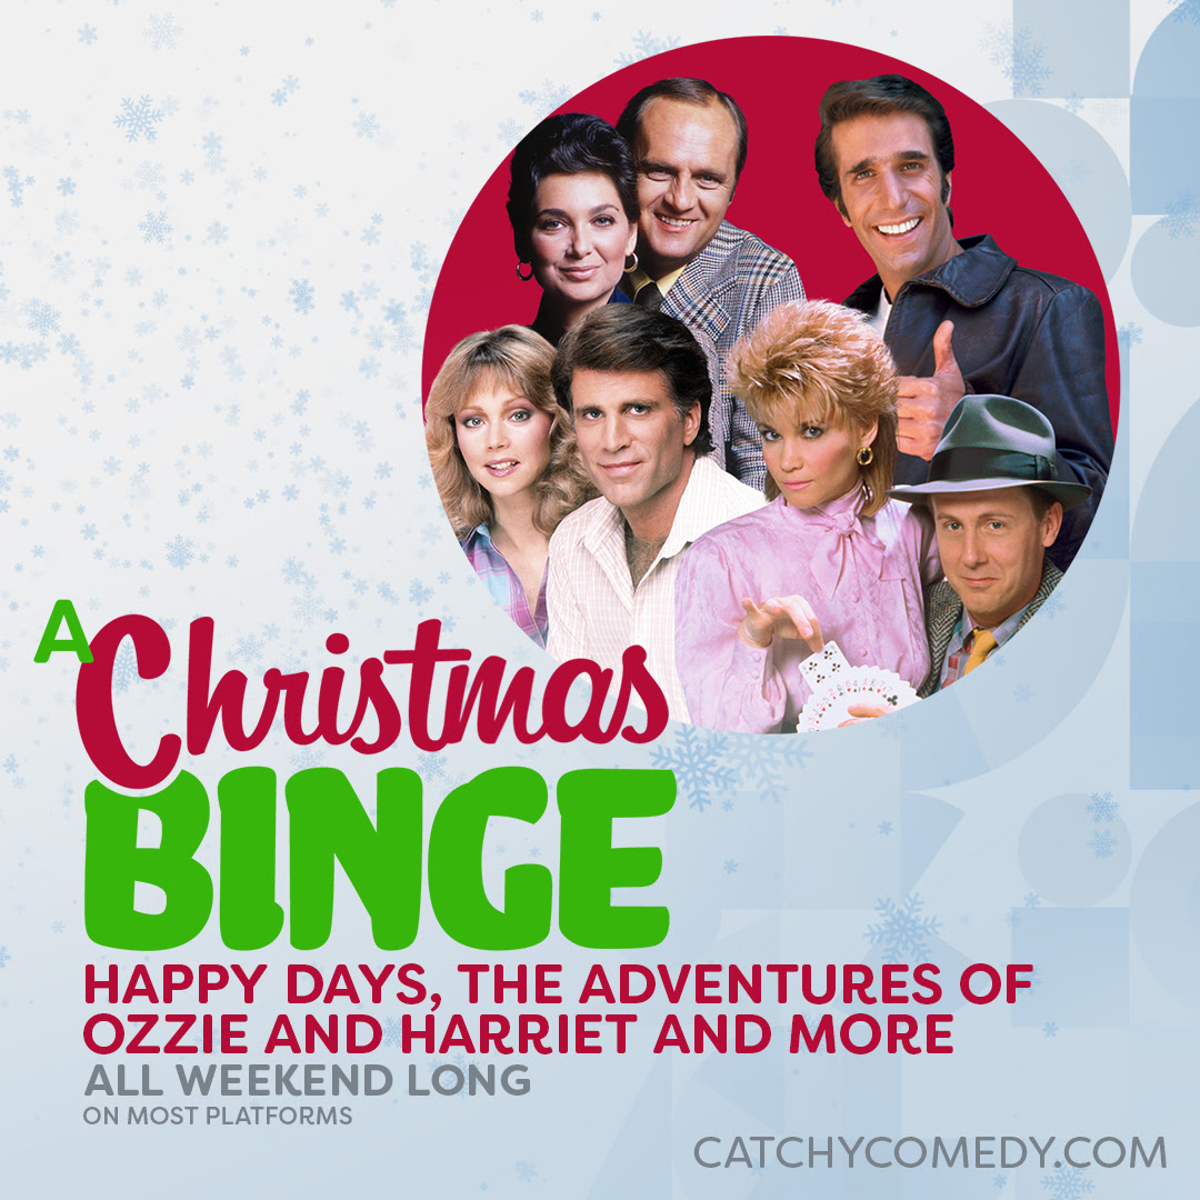 Watch the Holiday Episodes of Happy Days, ALF, And More During Catchy Comedy’s Christmas Binge